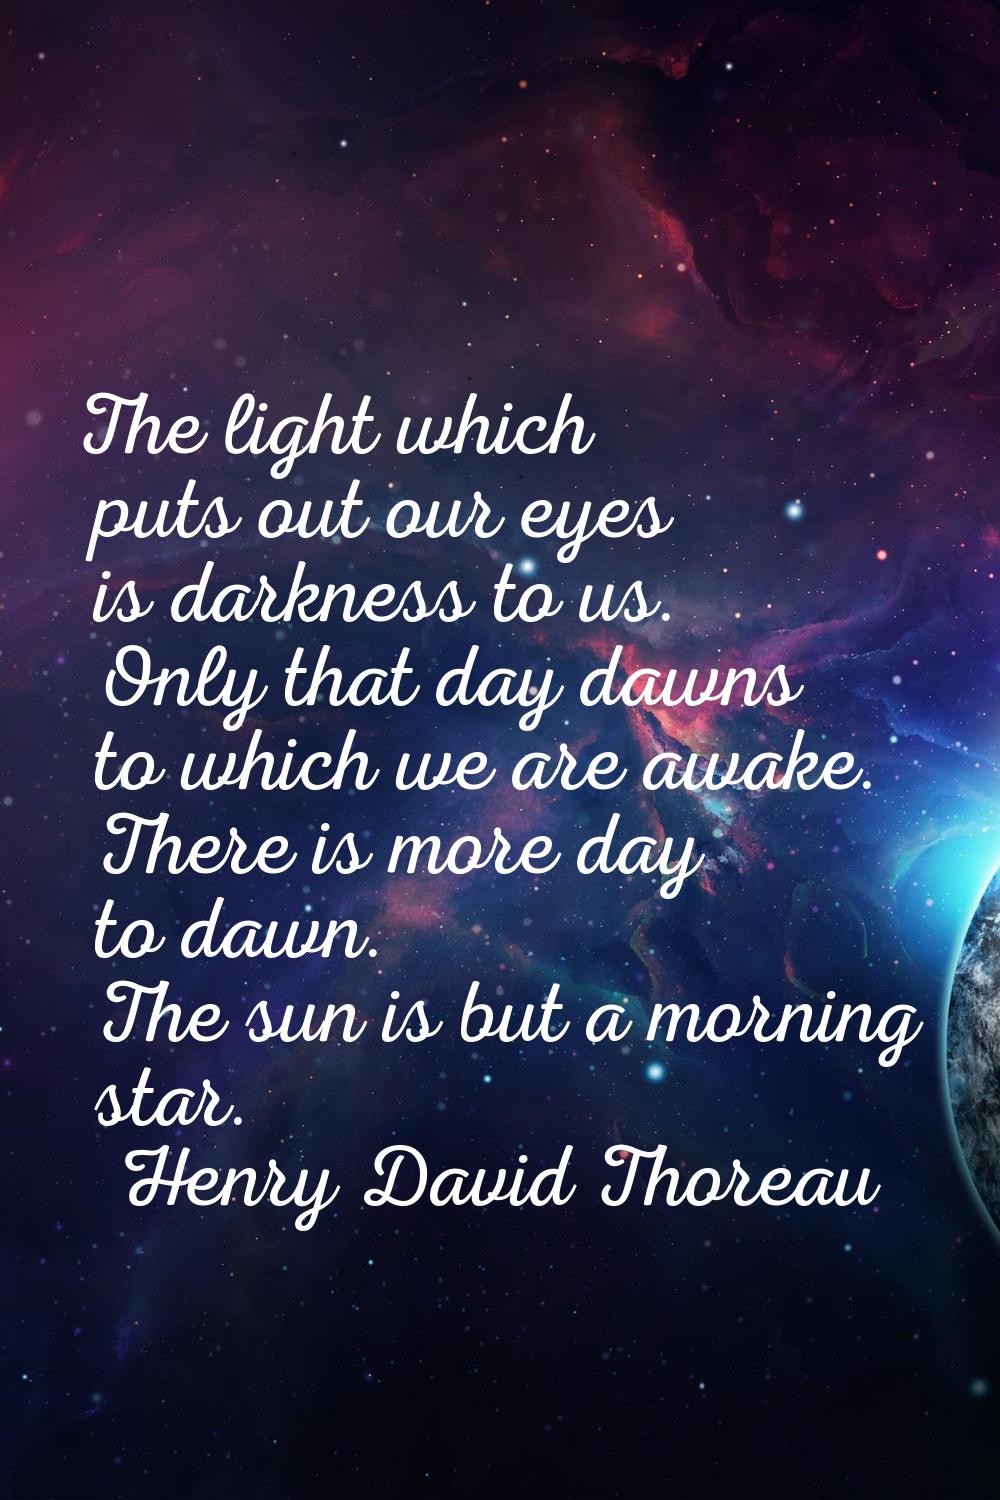 The light which puts out our eyes is darkness to us. Only that day dawns to which we are awake. The